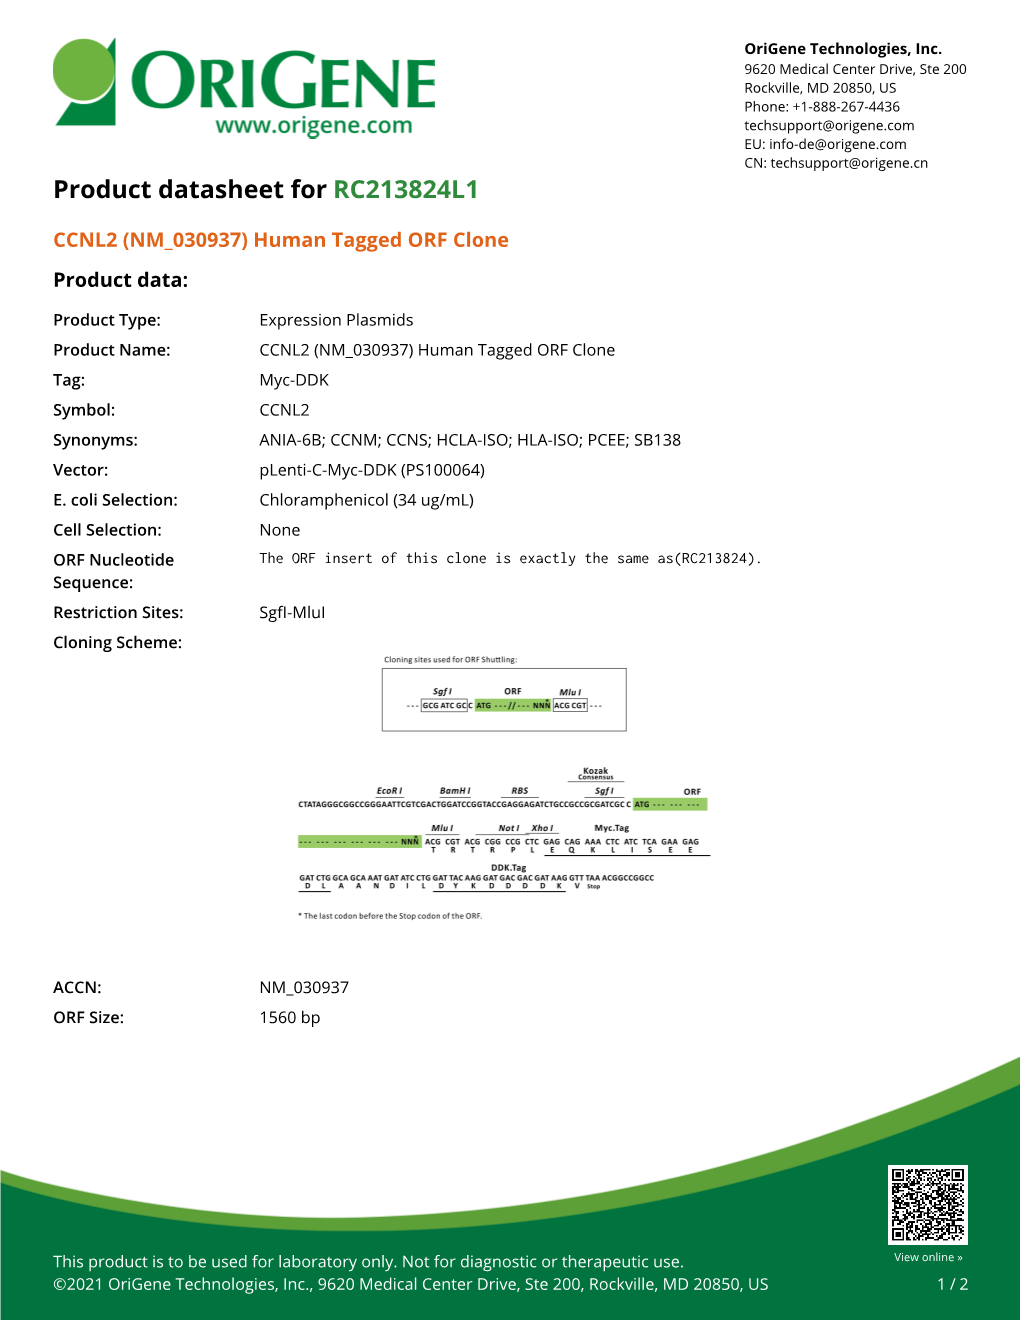 CCNL2 (NM 030937) Human Tagged ORF Clone Product Data